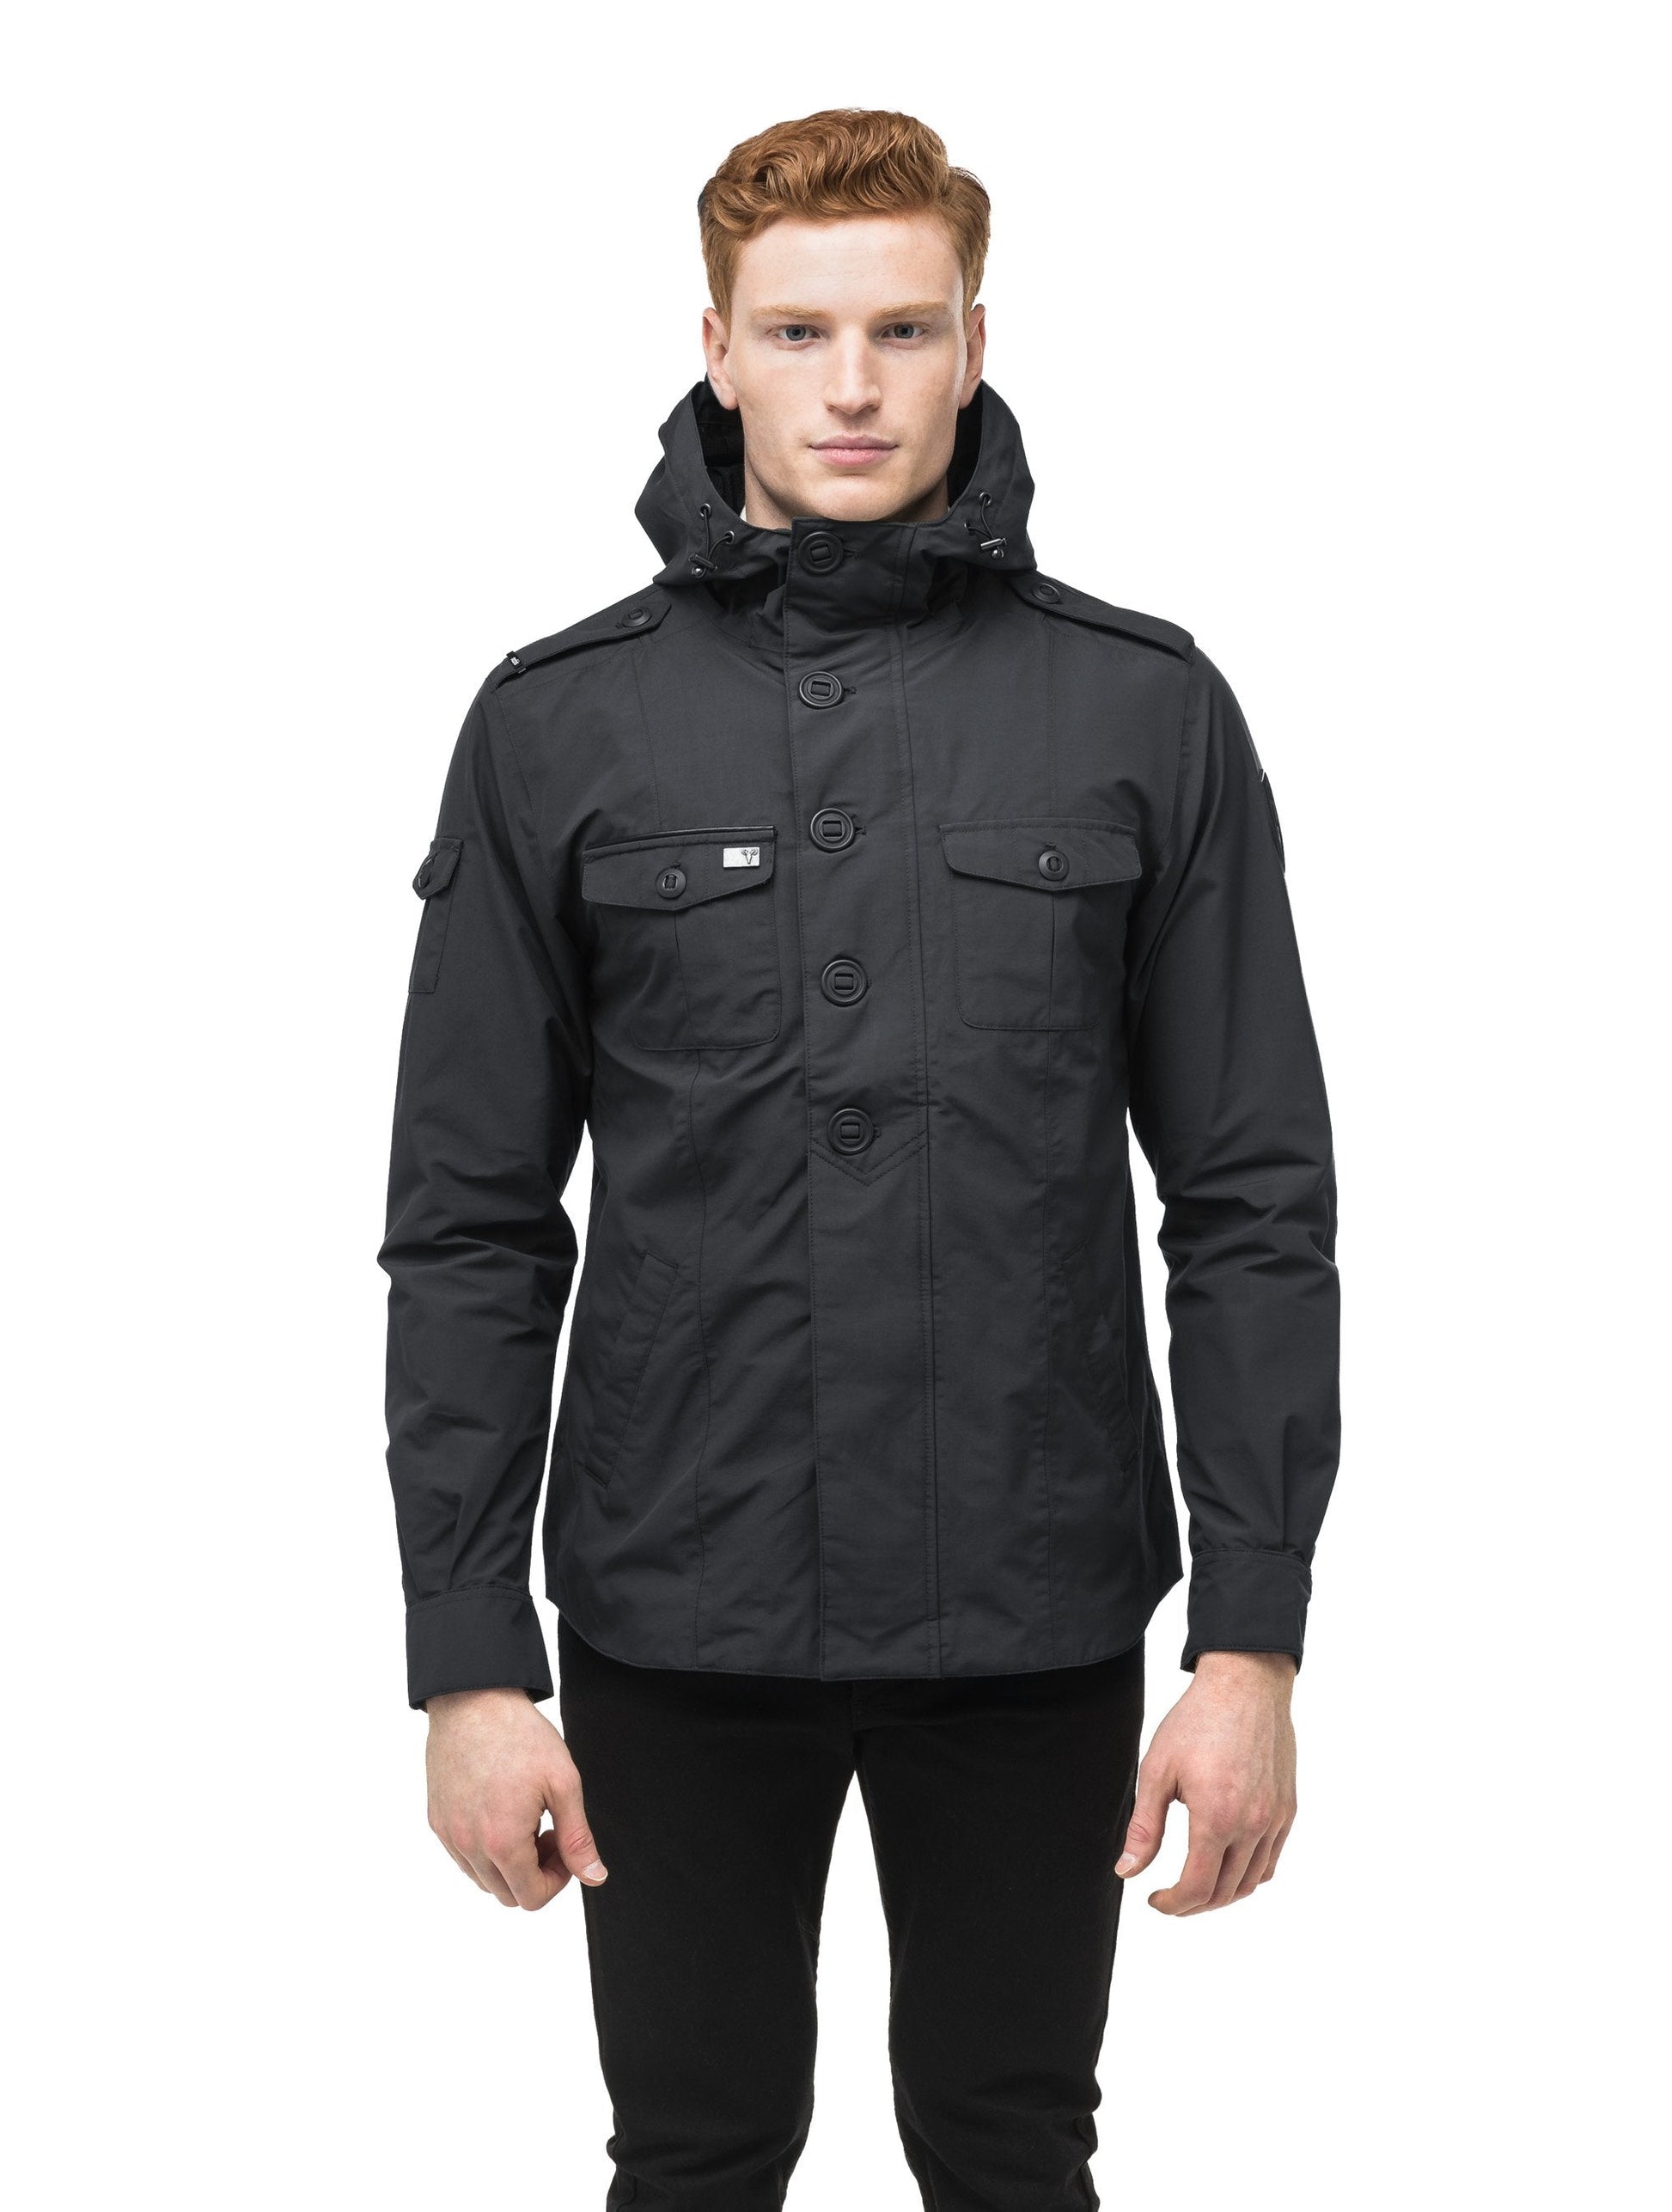 Men's hooded shirt jacket with patch chest pockets in Black